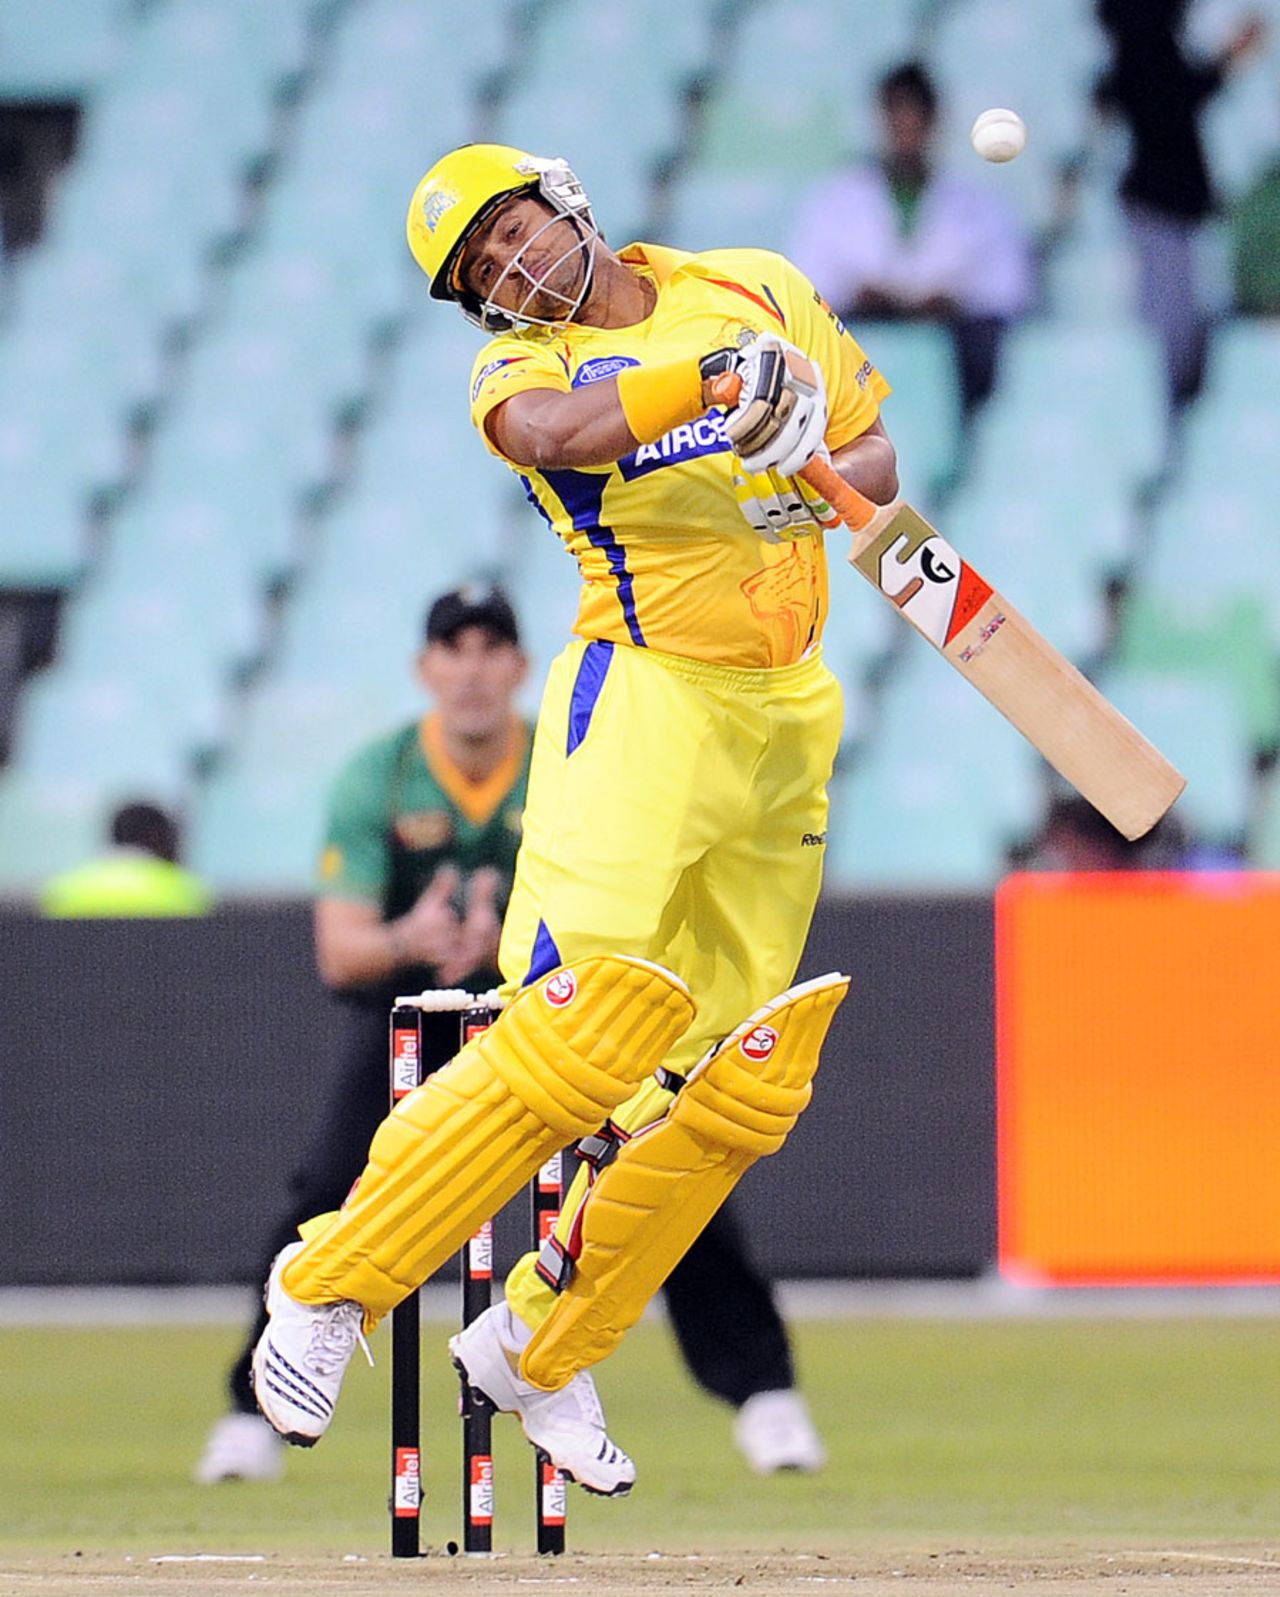 Suresh Raina gets out of the way of a bouncer, Central Districts v Chennai Super Kings, Champions League Twenty20, Durban, September 11, 2010